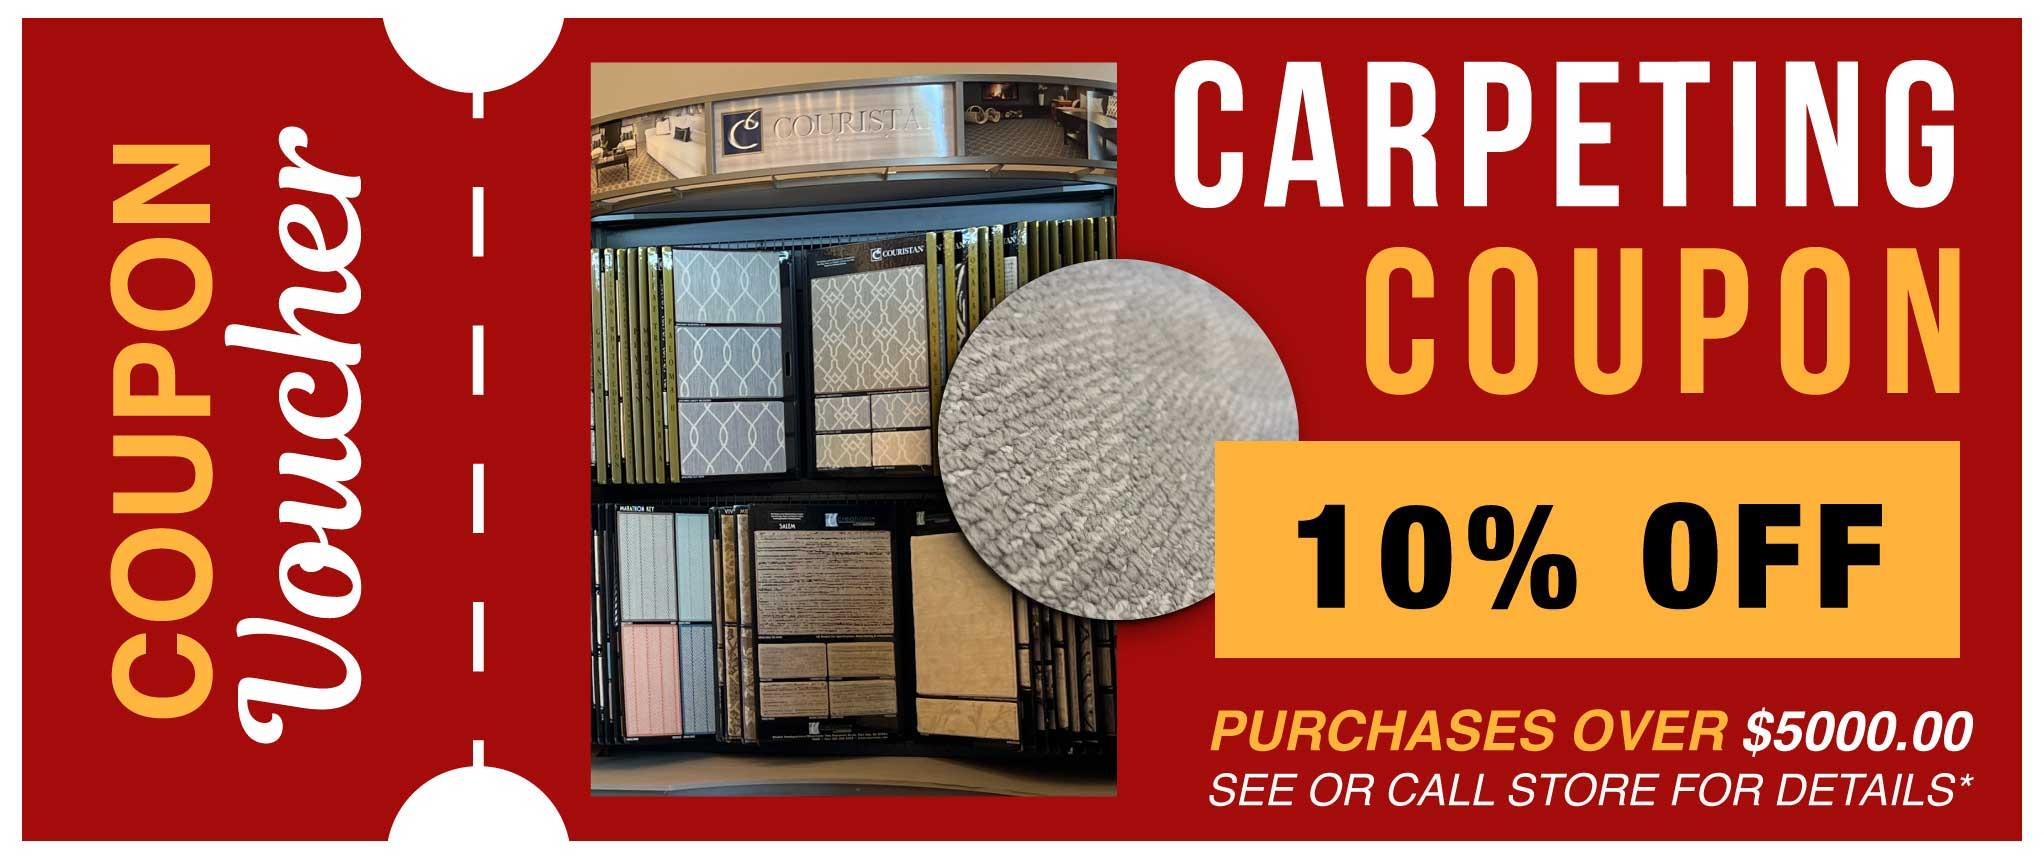 10% off carpeting coupon from Kaoud Rugs and Carpet